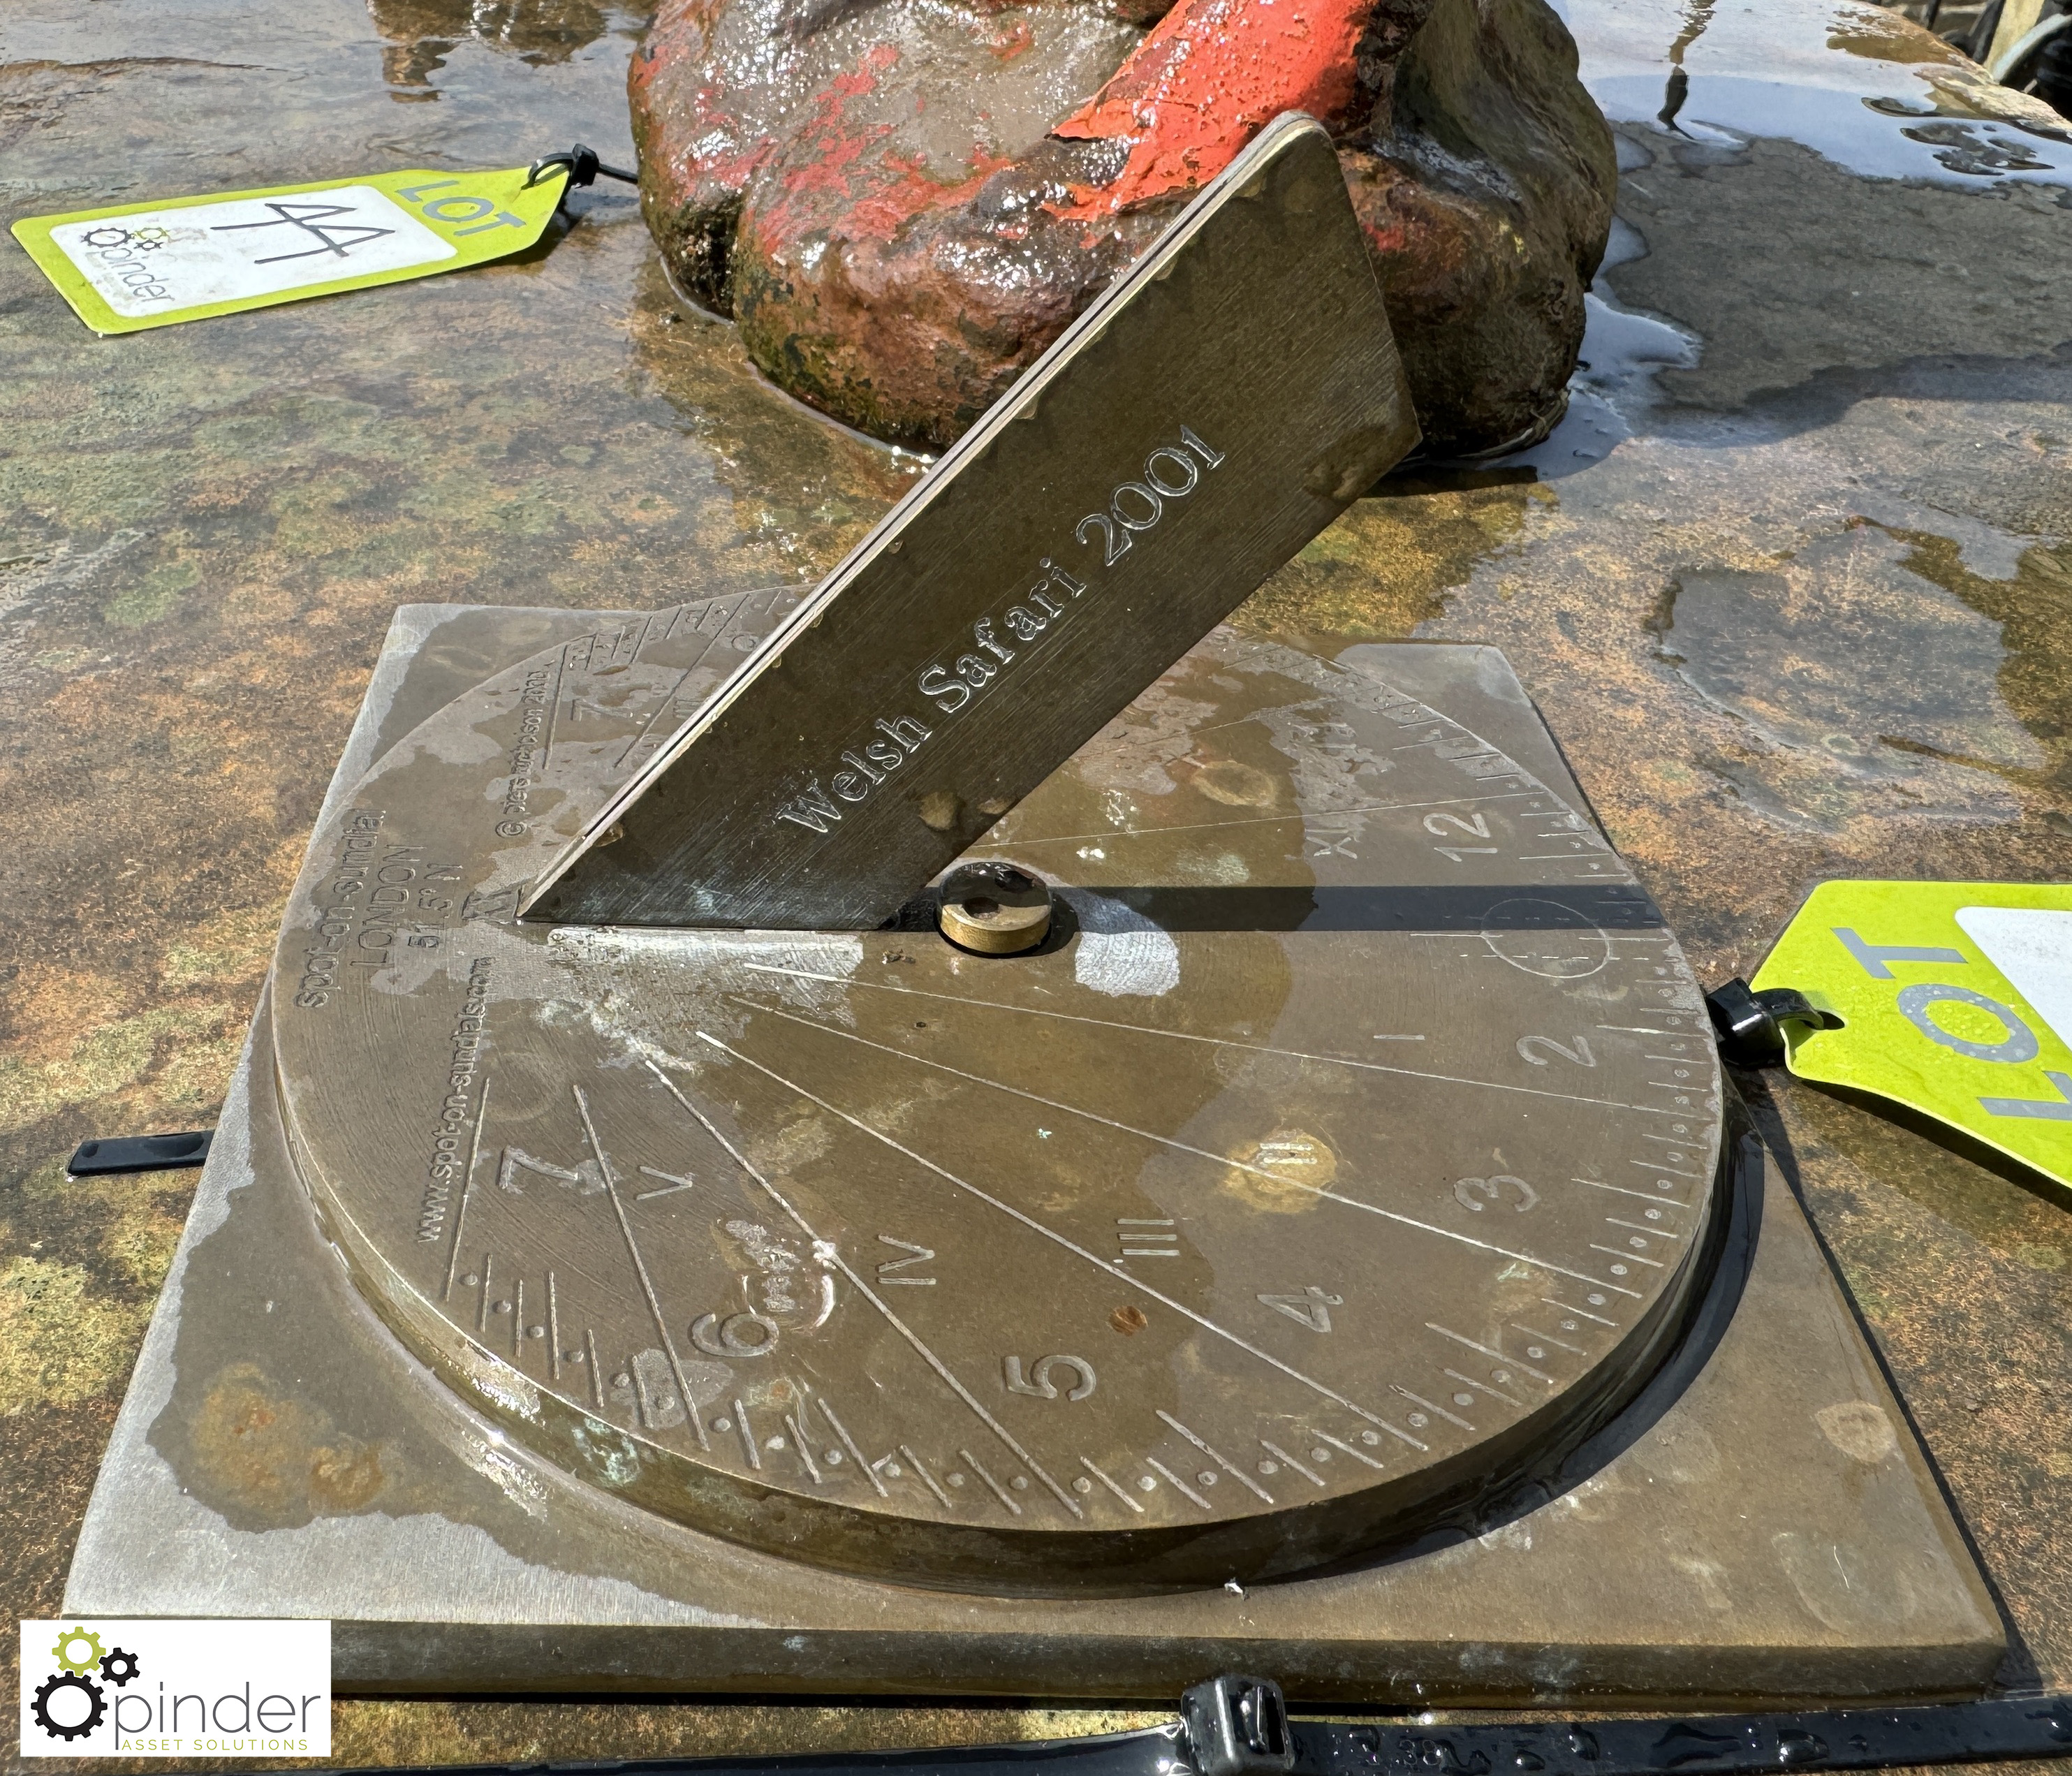 A bronze precision instrument mobile Sundial Plate, made in London, inscription “Welsh Safari 2001” - Image 2 of 6